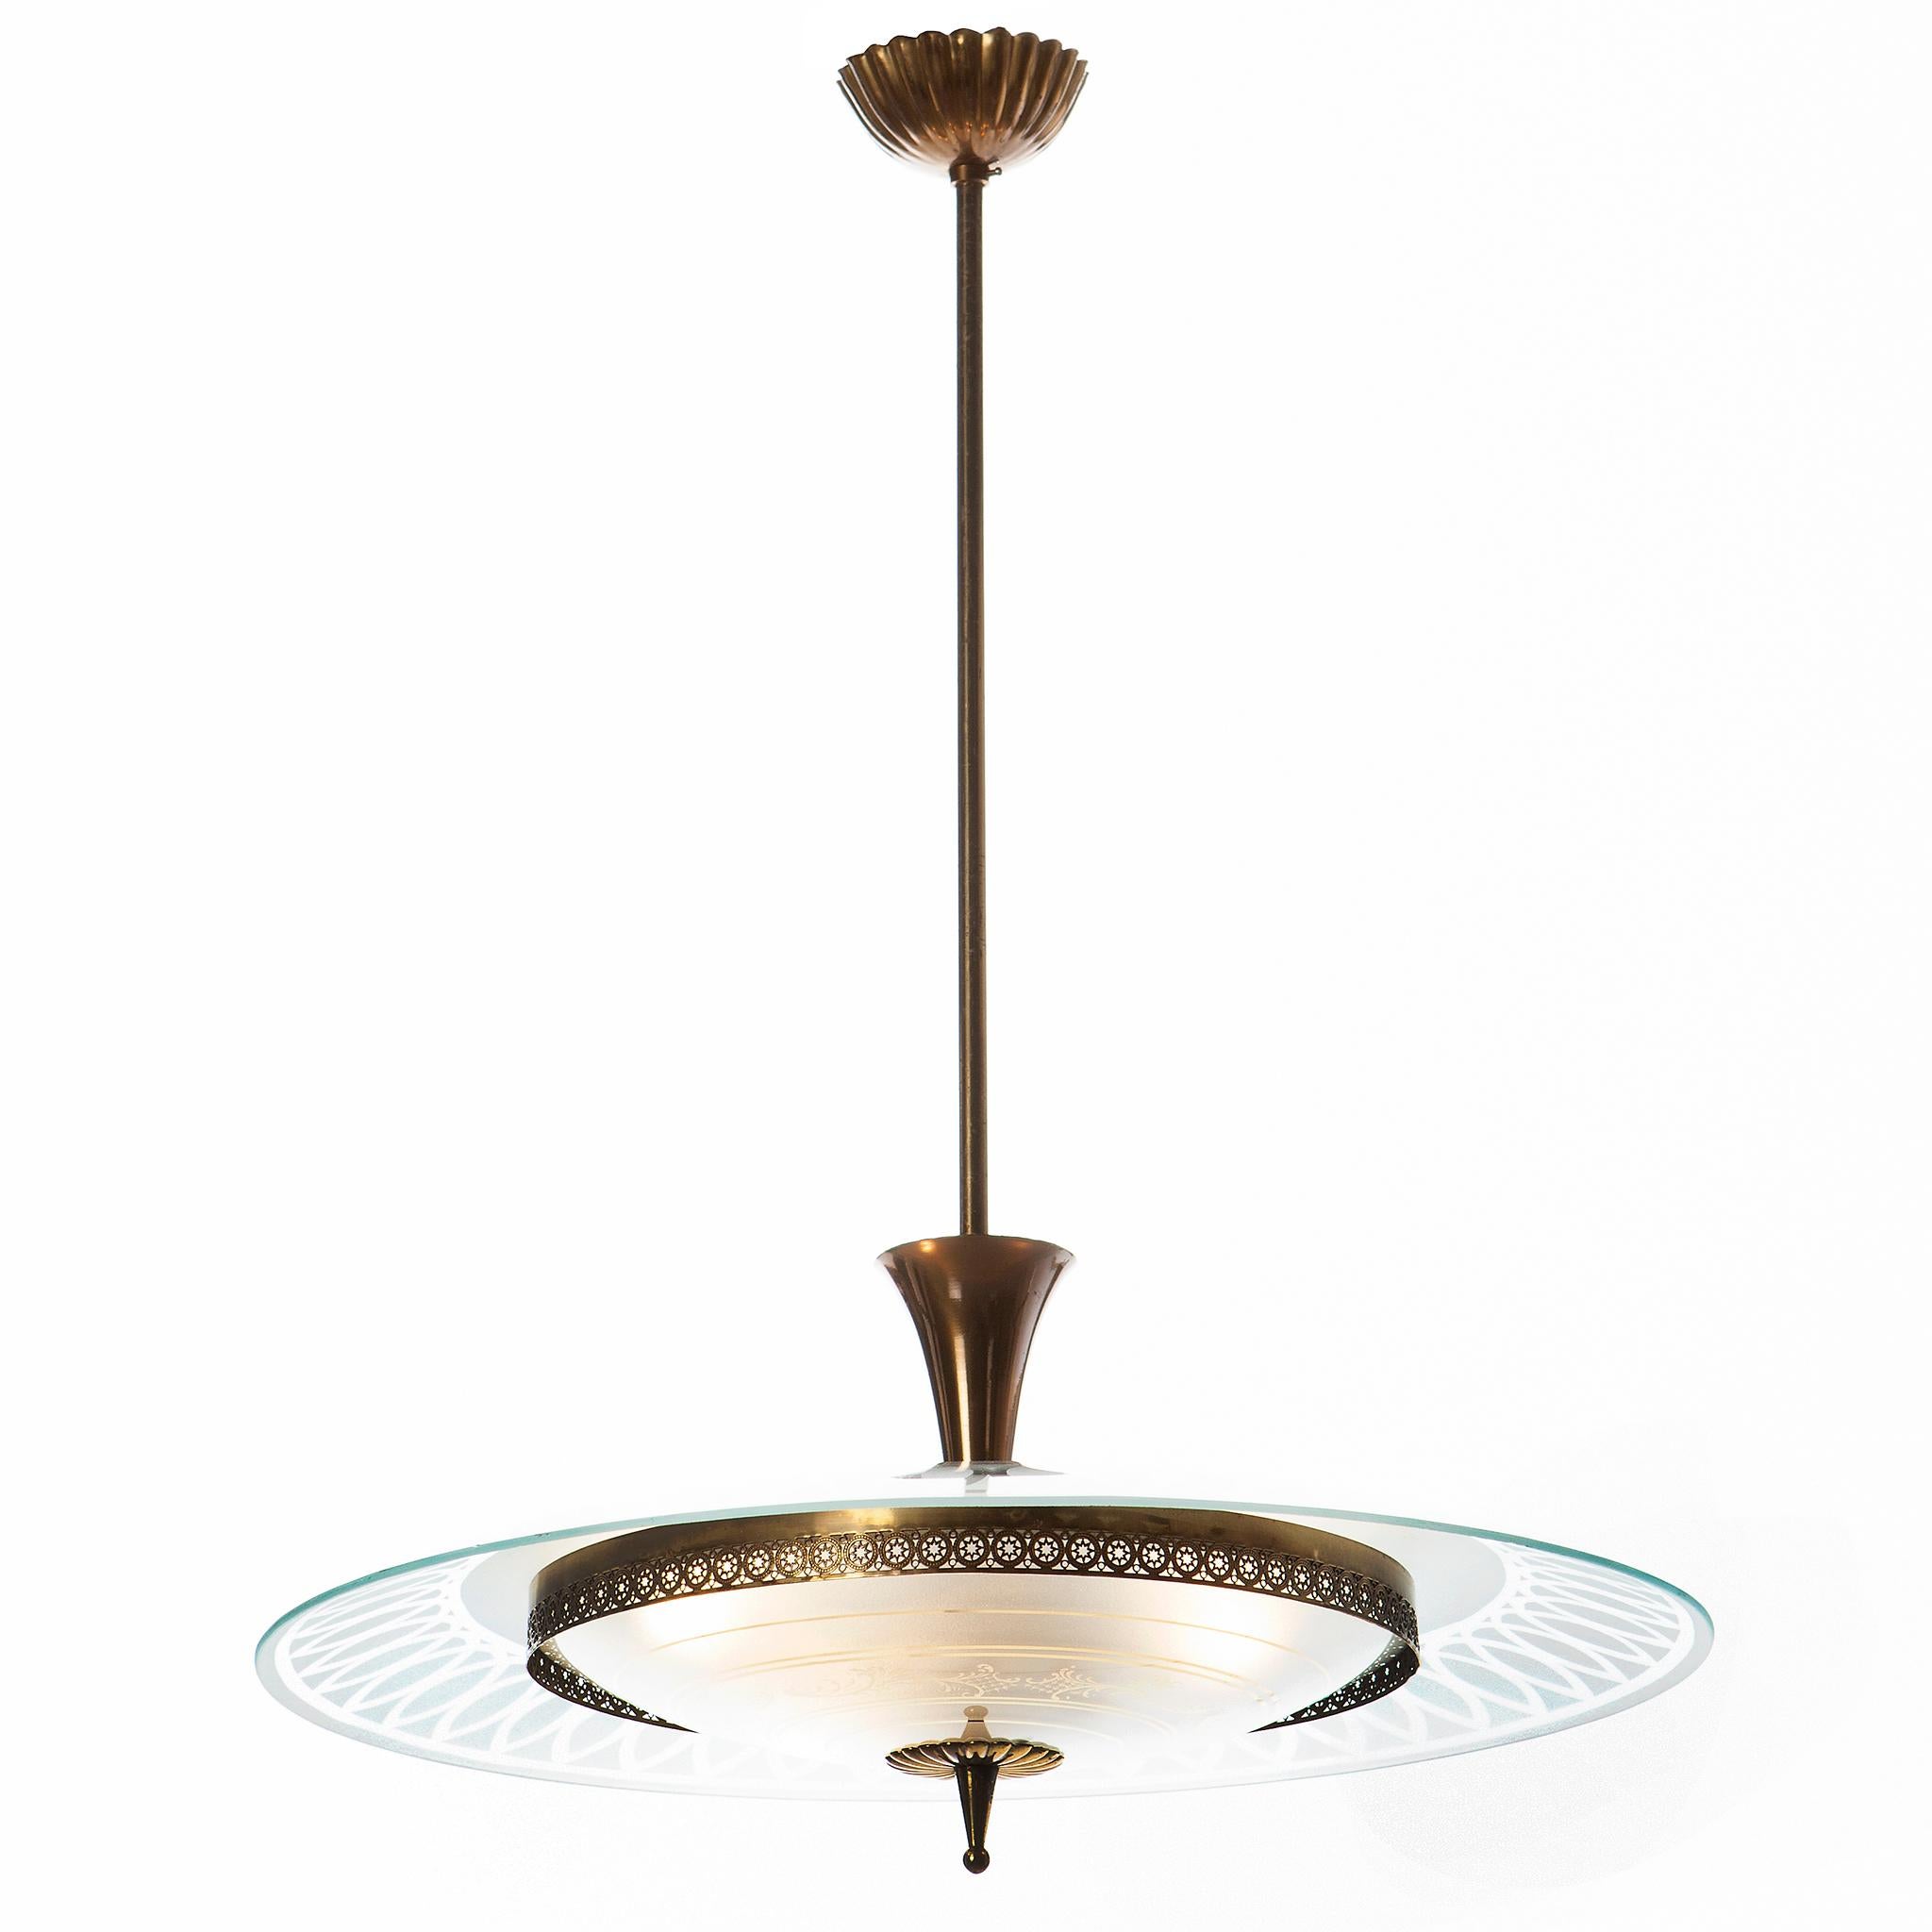 This stunning and super elegant light consisting of a brass frame and 2 unique glass reflector/saucers. 
The lower round curved glass reflector with gold patterns mounts below a larger round etched & clear glass reflector. A beautiful, decorated